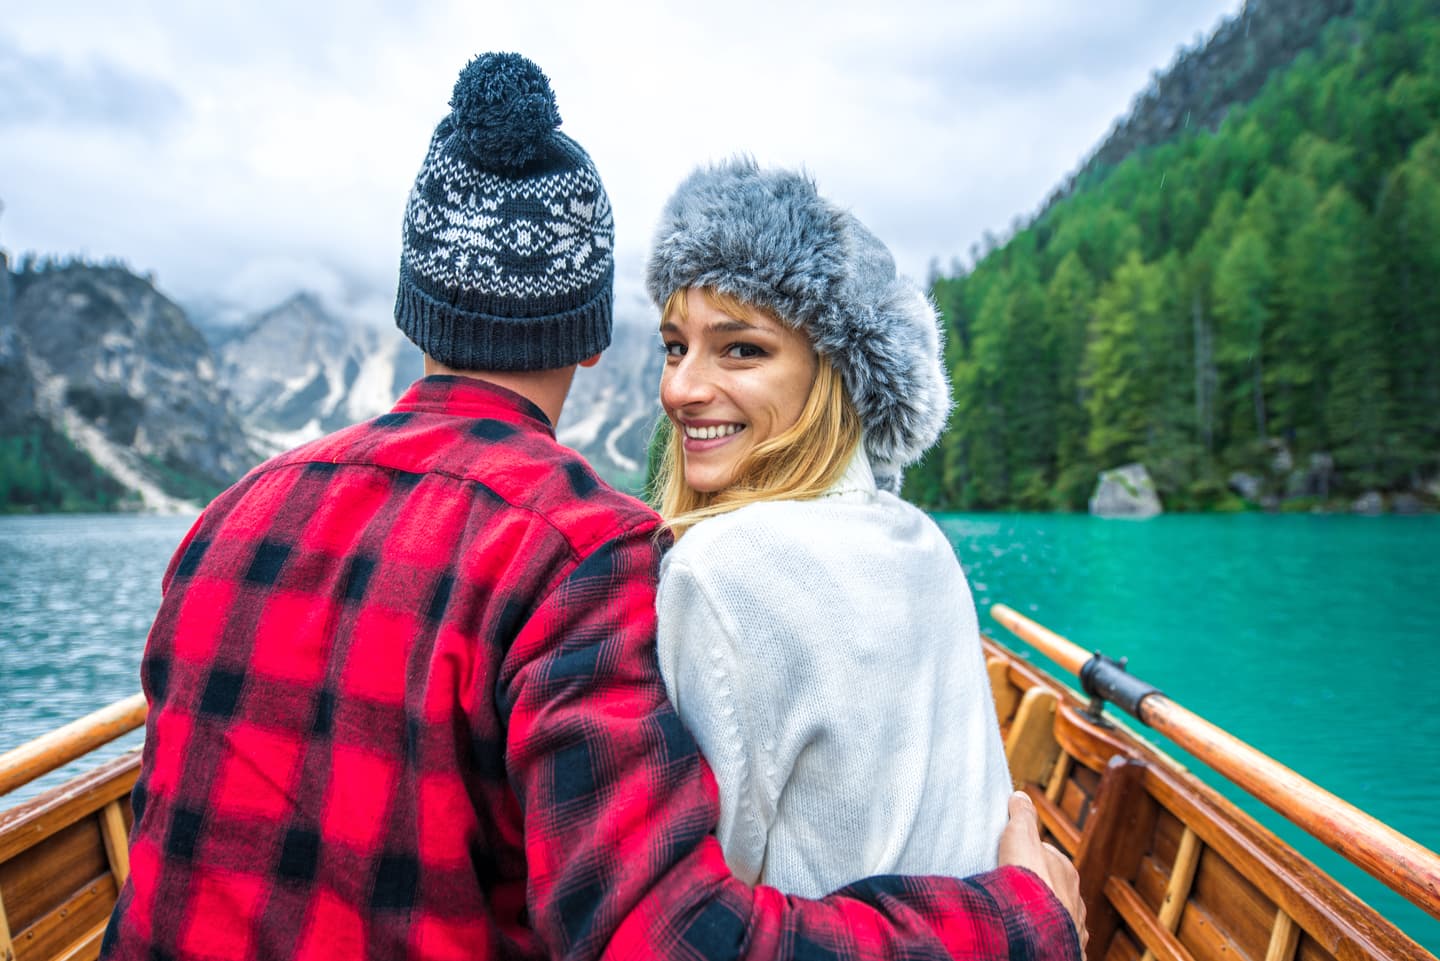 Couple boating in a lake in Canada